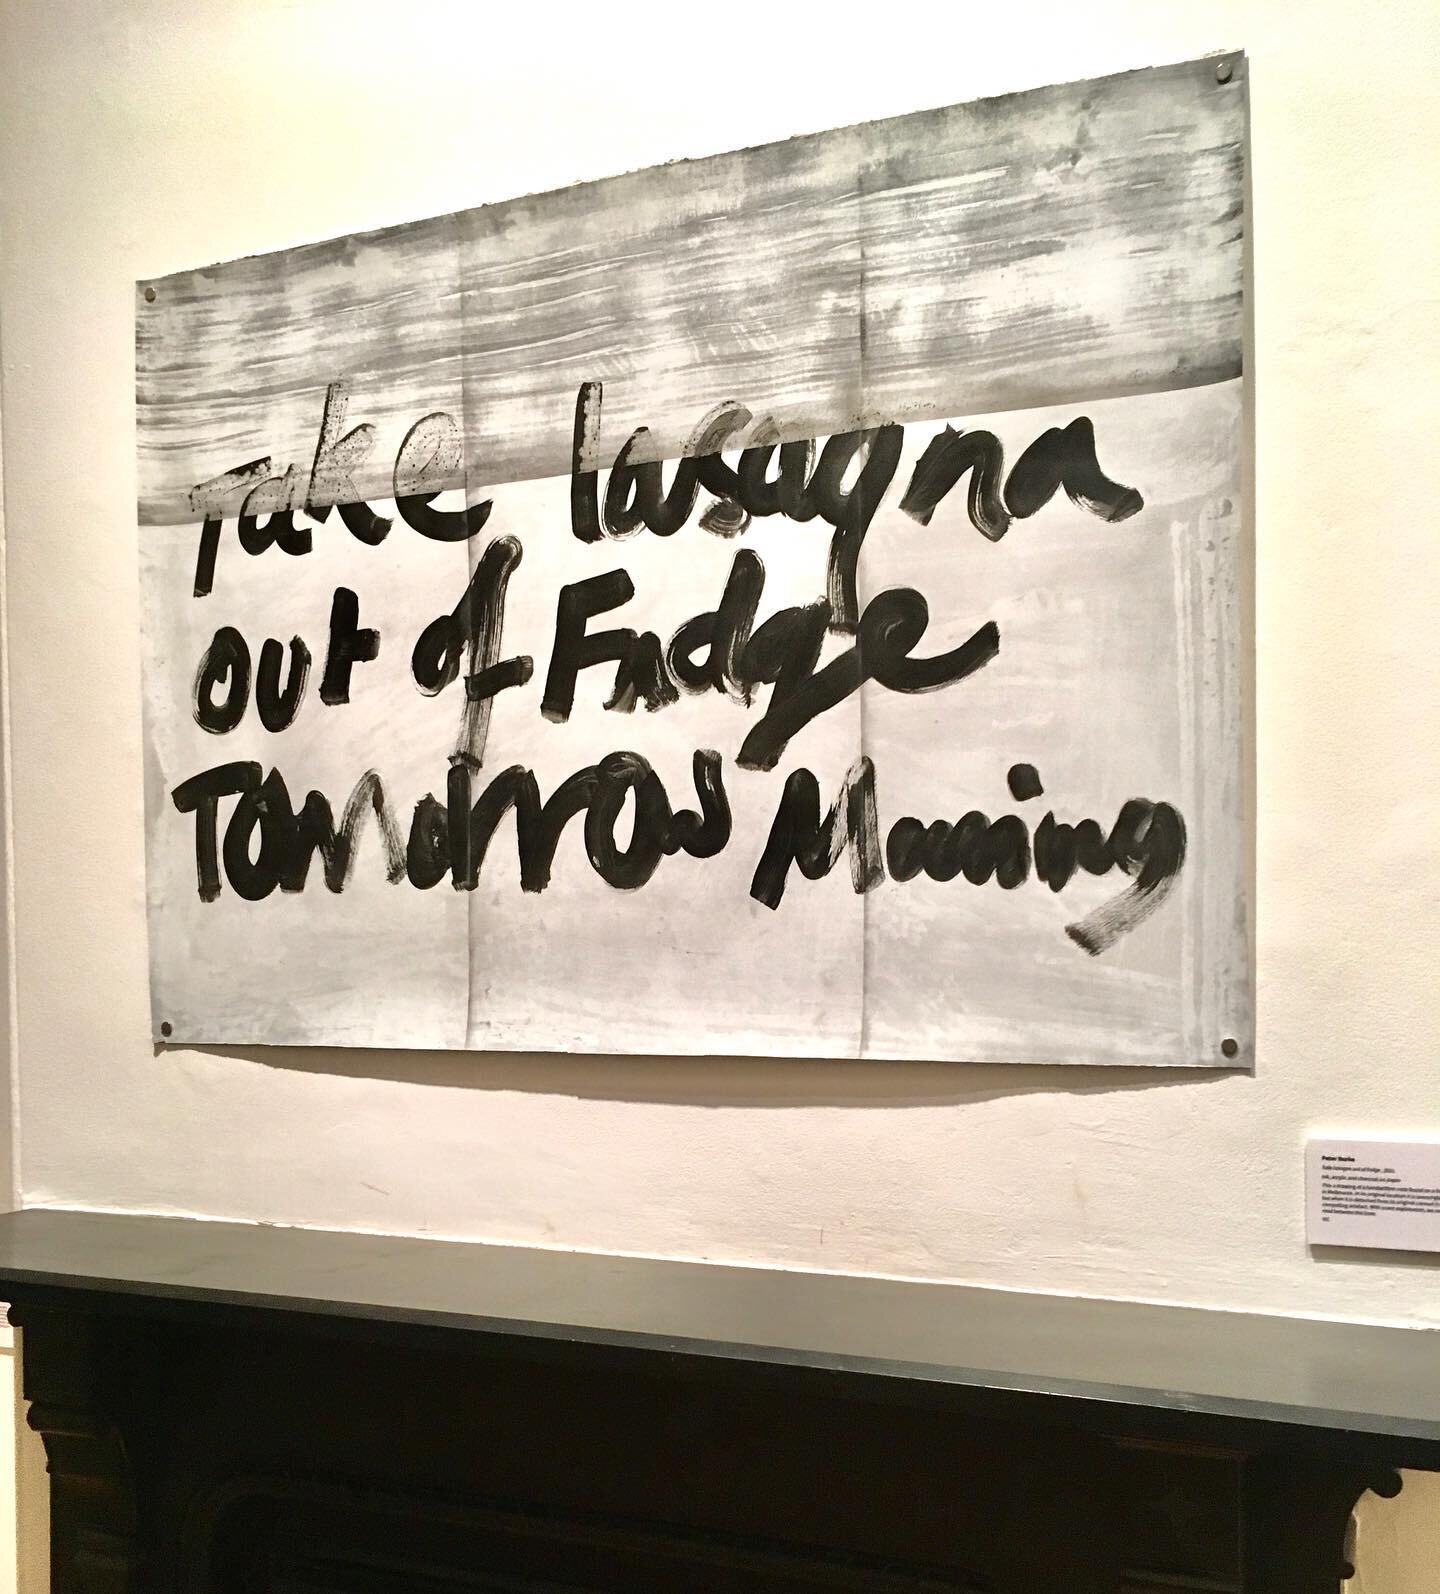 &lsquo;Take Lasagne Out of Fridge&rsquo;, 

New drawing appropriately hung above the mantlepiece in the 2021 Footscray Art Prize.
Thanks FAP, COM and VU.
Runs until June 5 at the Footscray Community Art Centre, 45 Moreland St Footscray.

#Footscrayar